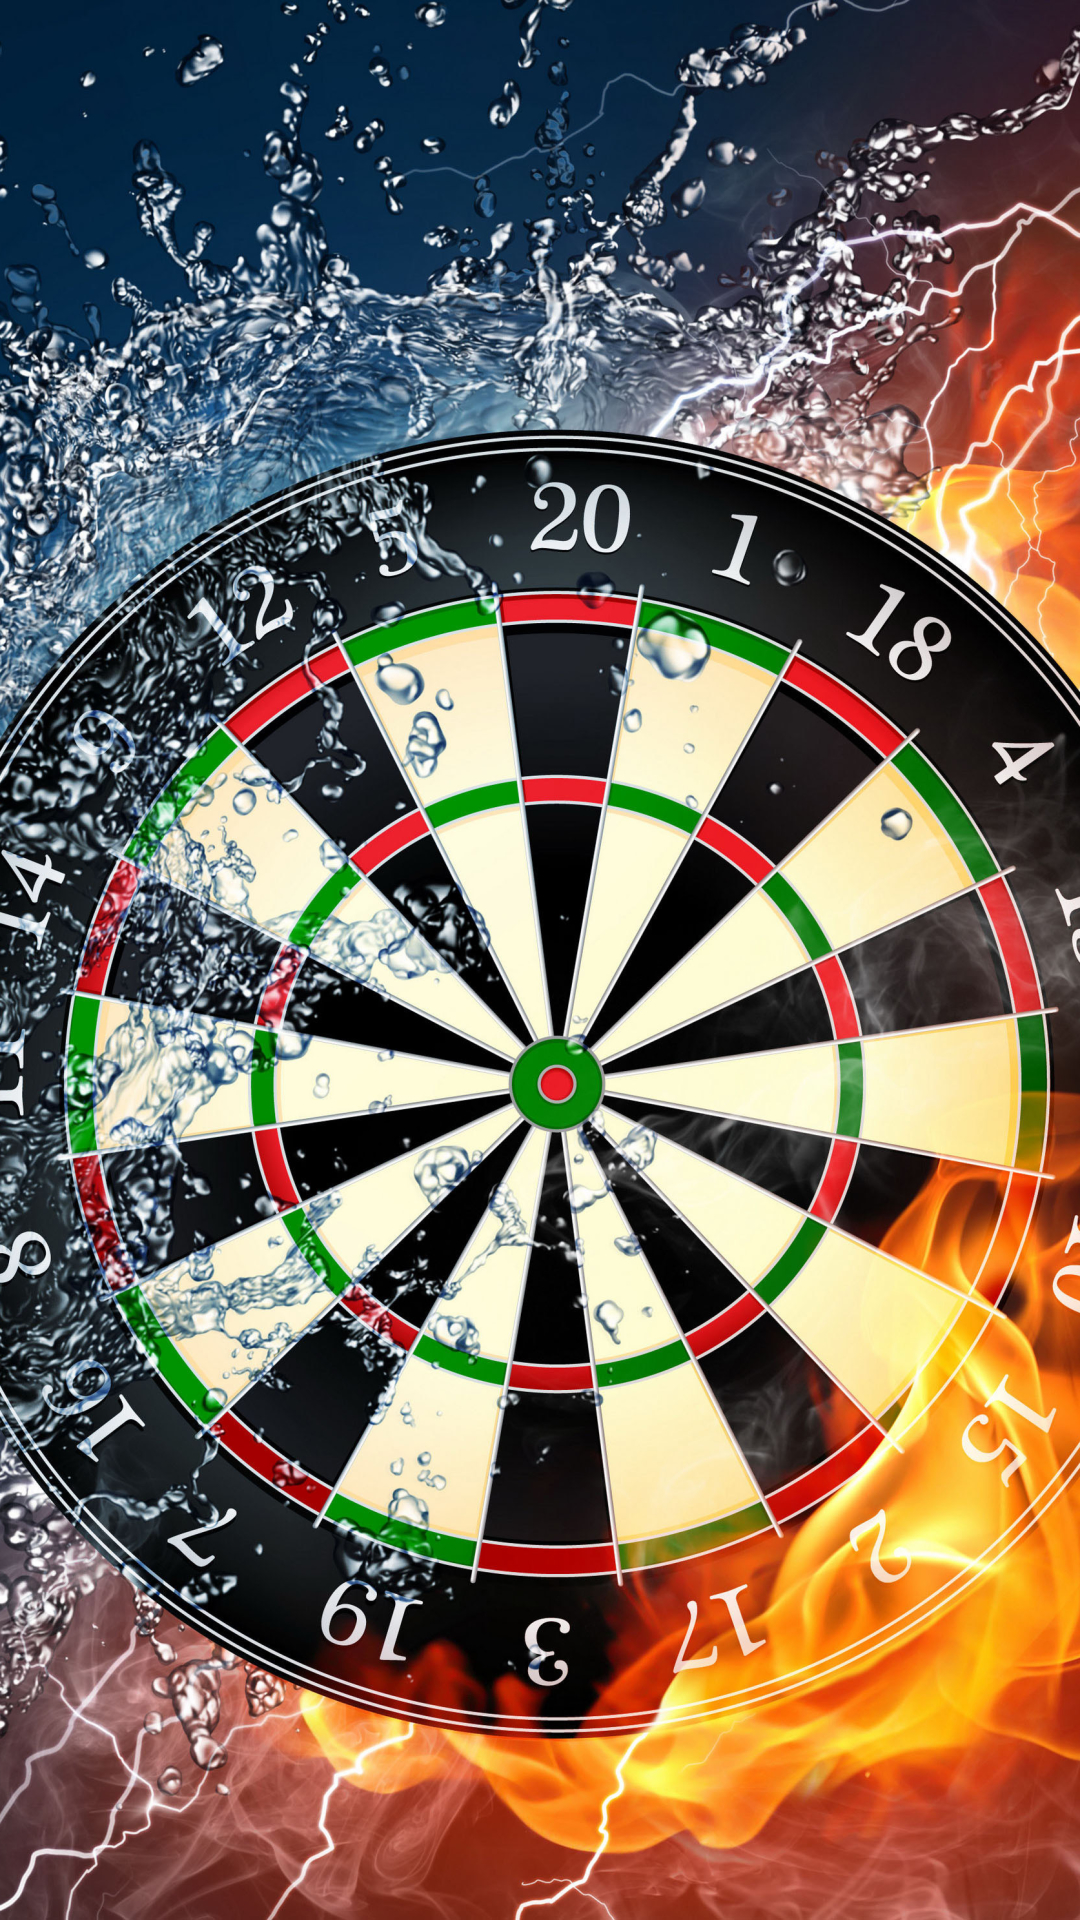 The Elements Of Darts by Shrove